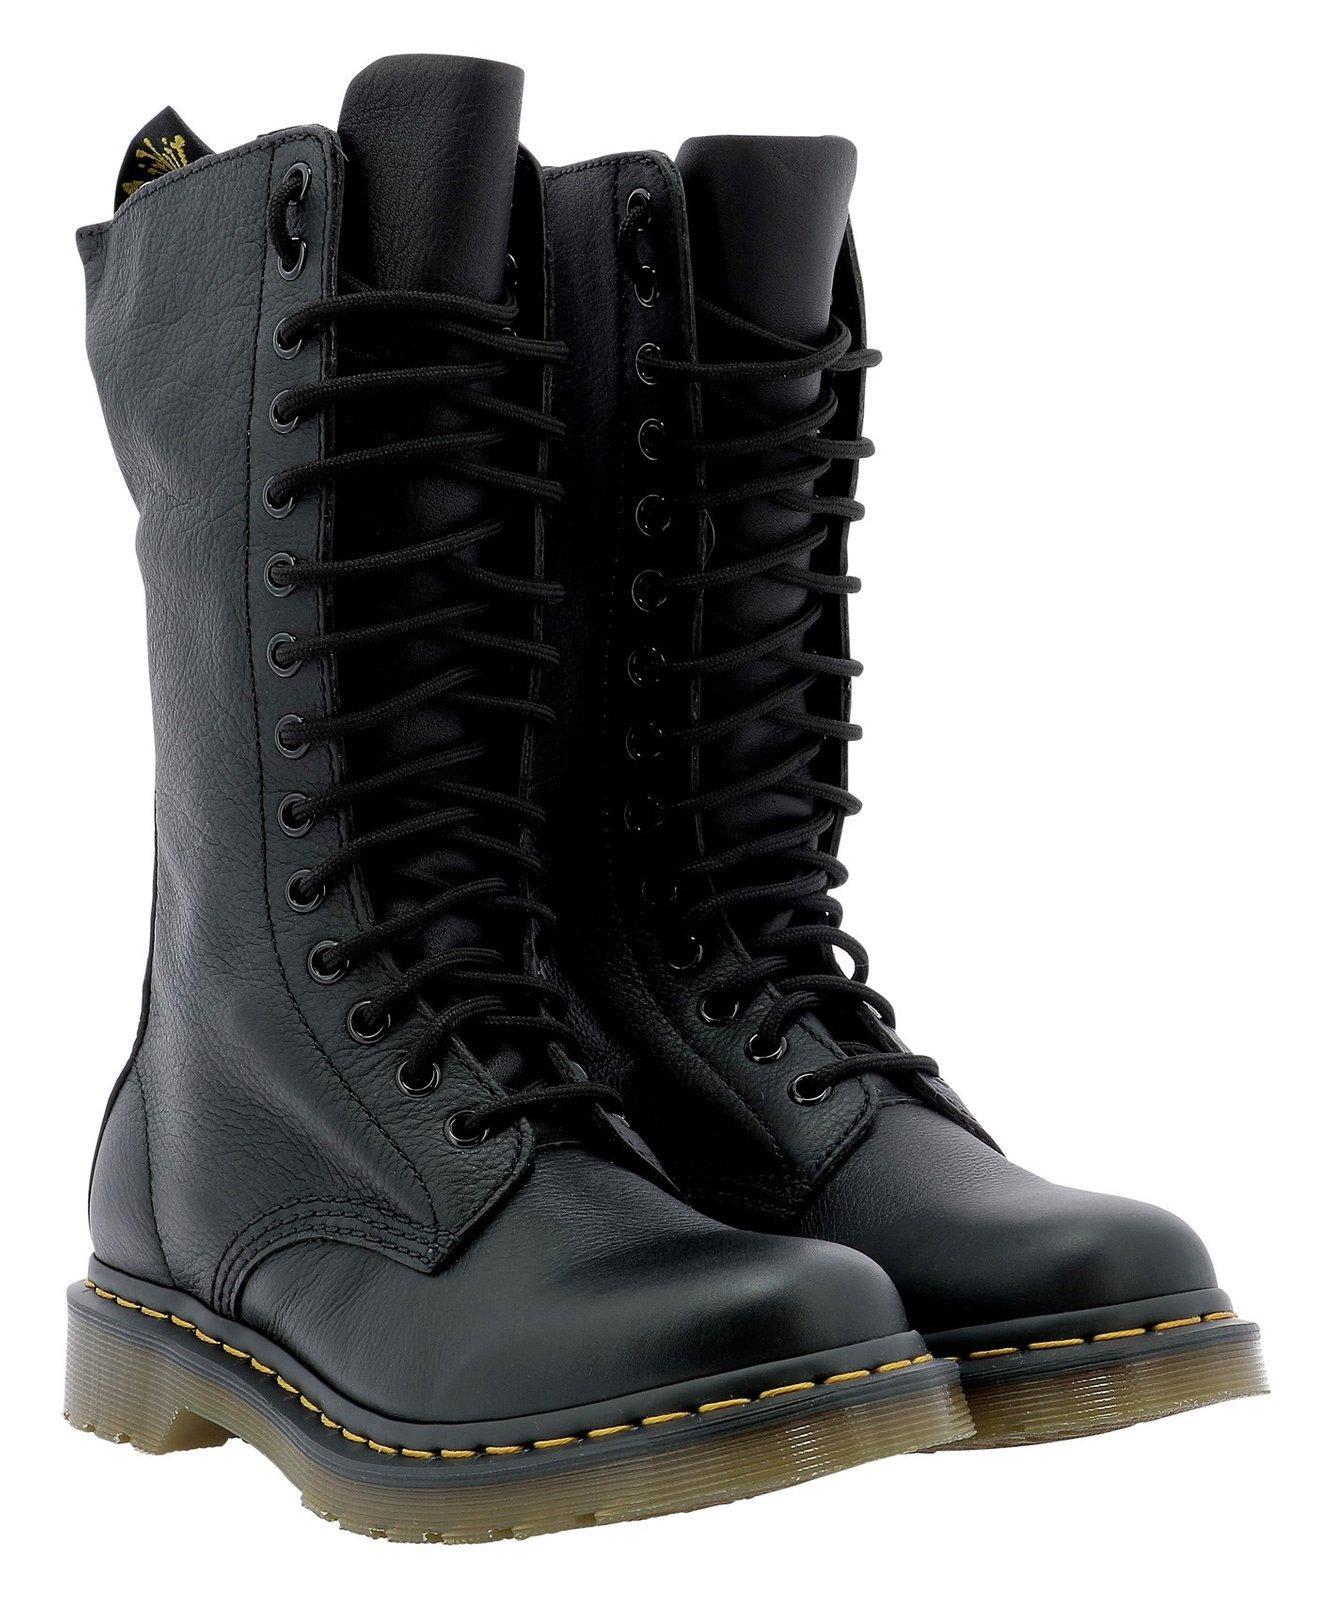 Dr. Martens Ib99 Lace-up Boots in Black | Lyst